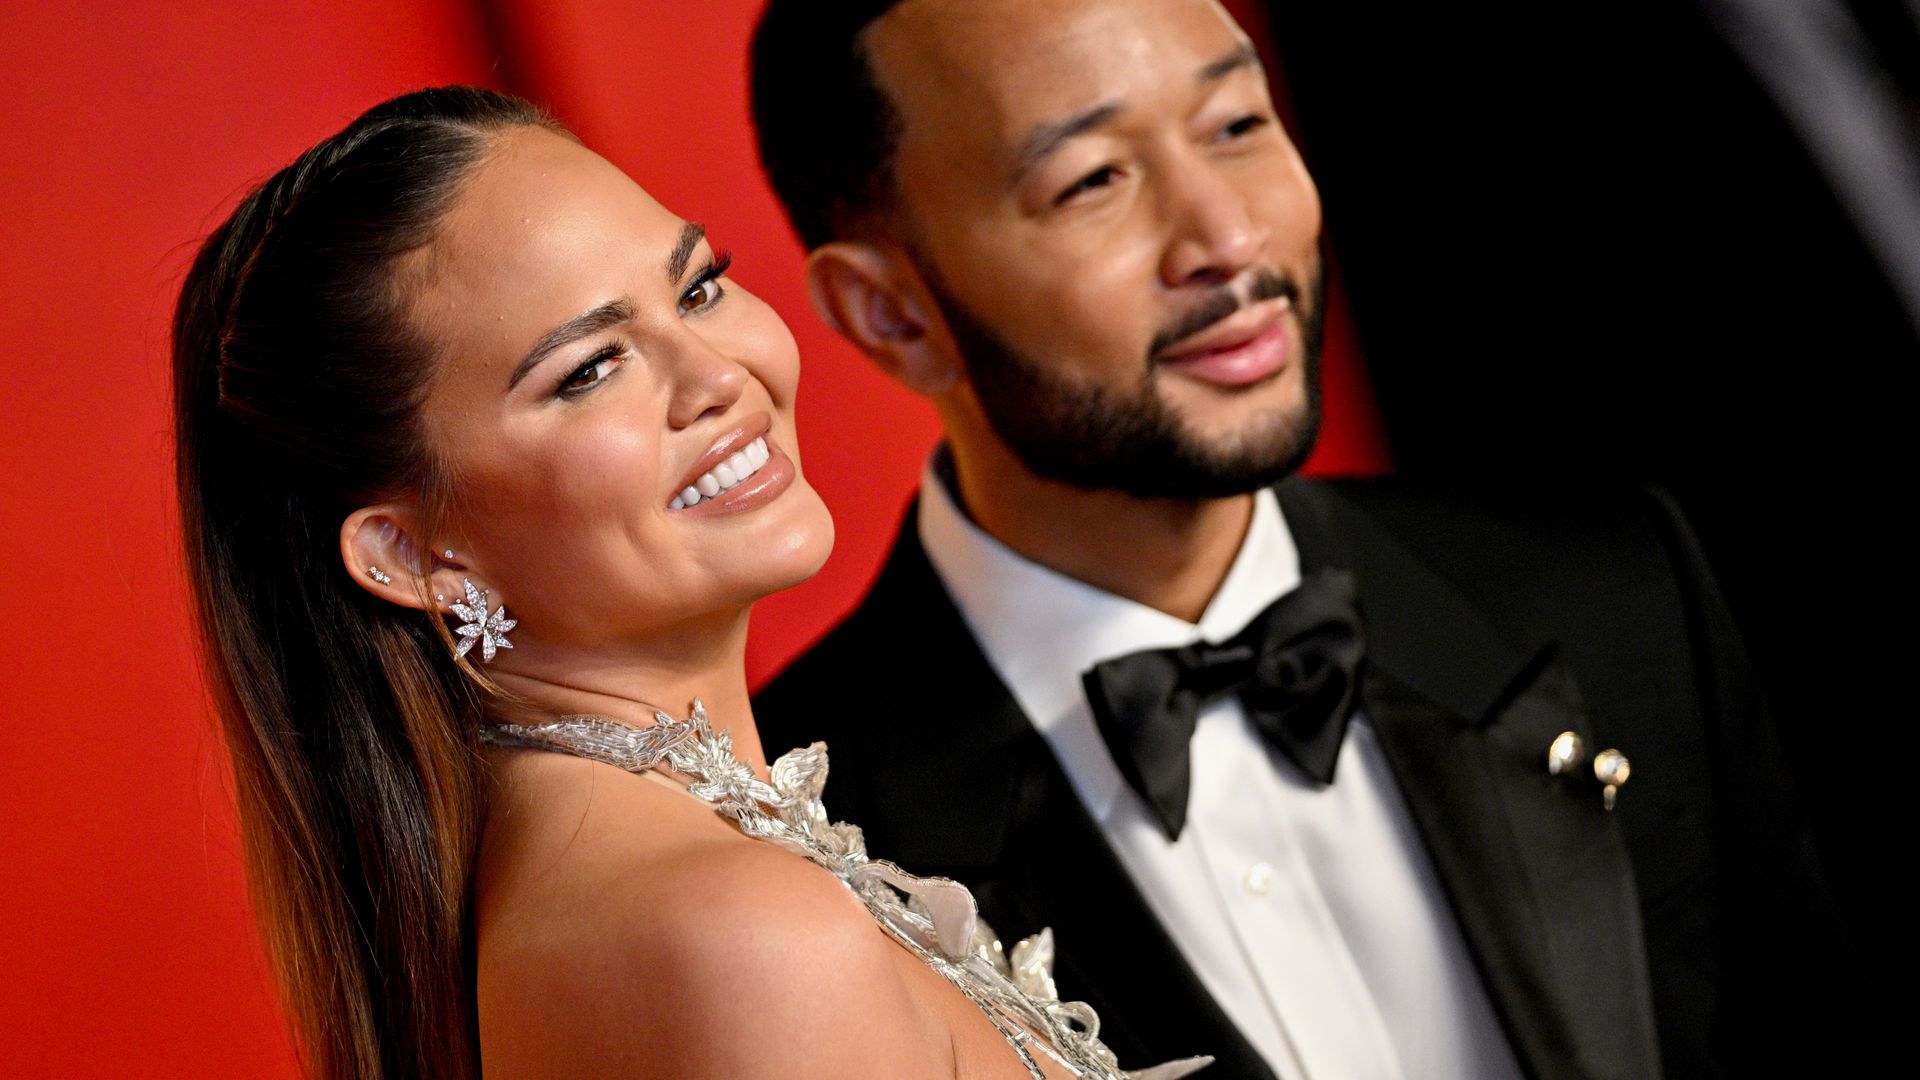 BEVERLY HILLS, CALIFORNIA - MARCH 10: Chrissy Teigen, John Legend attend the 2024 Vanity Fair Oscar Party Hosted By Radhika Jones at Wallis Annenberg Center for the Performing Arts on March 10, 2024 in Beverly Hills, California. (Photo by Lionel Hahn/Getty Images)